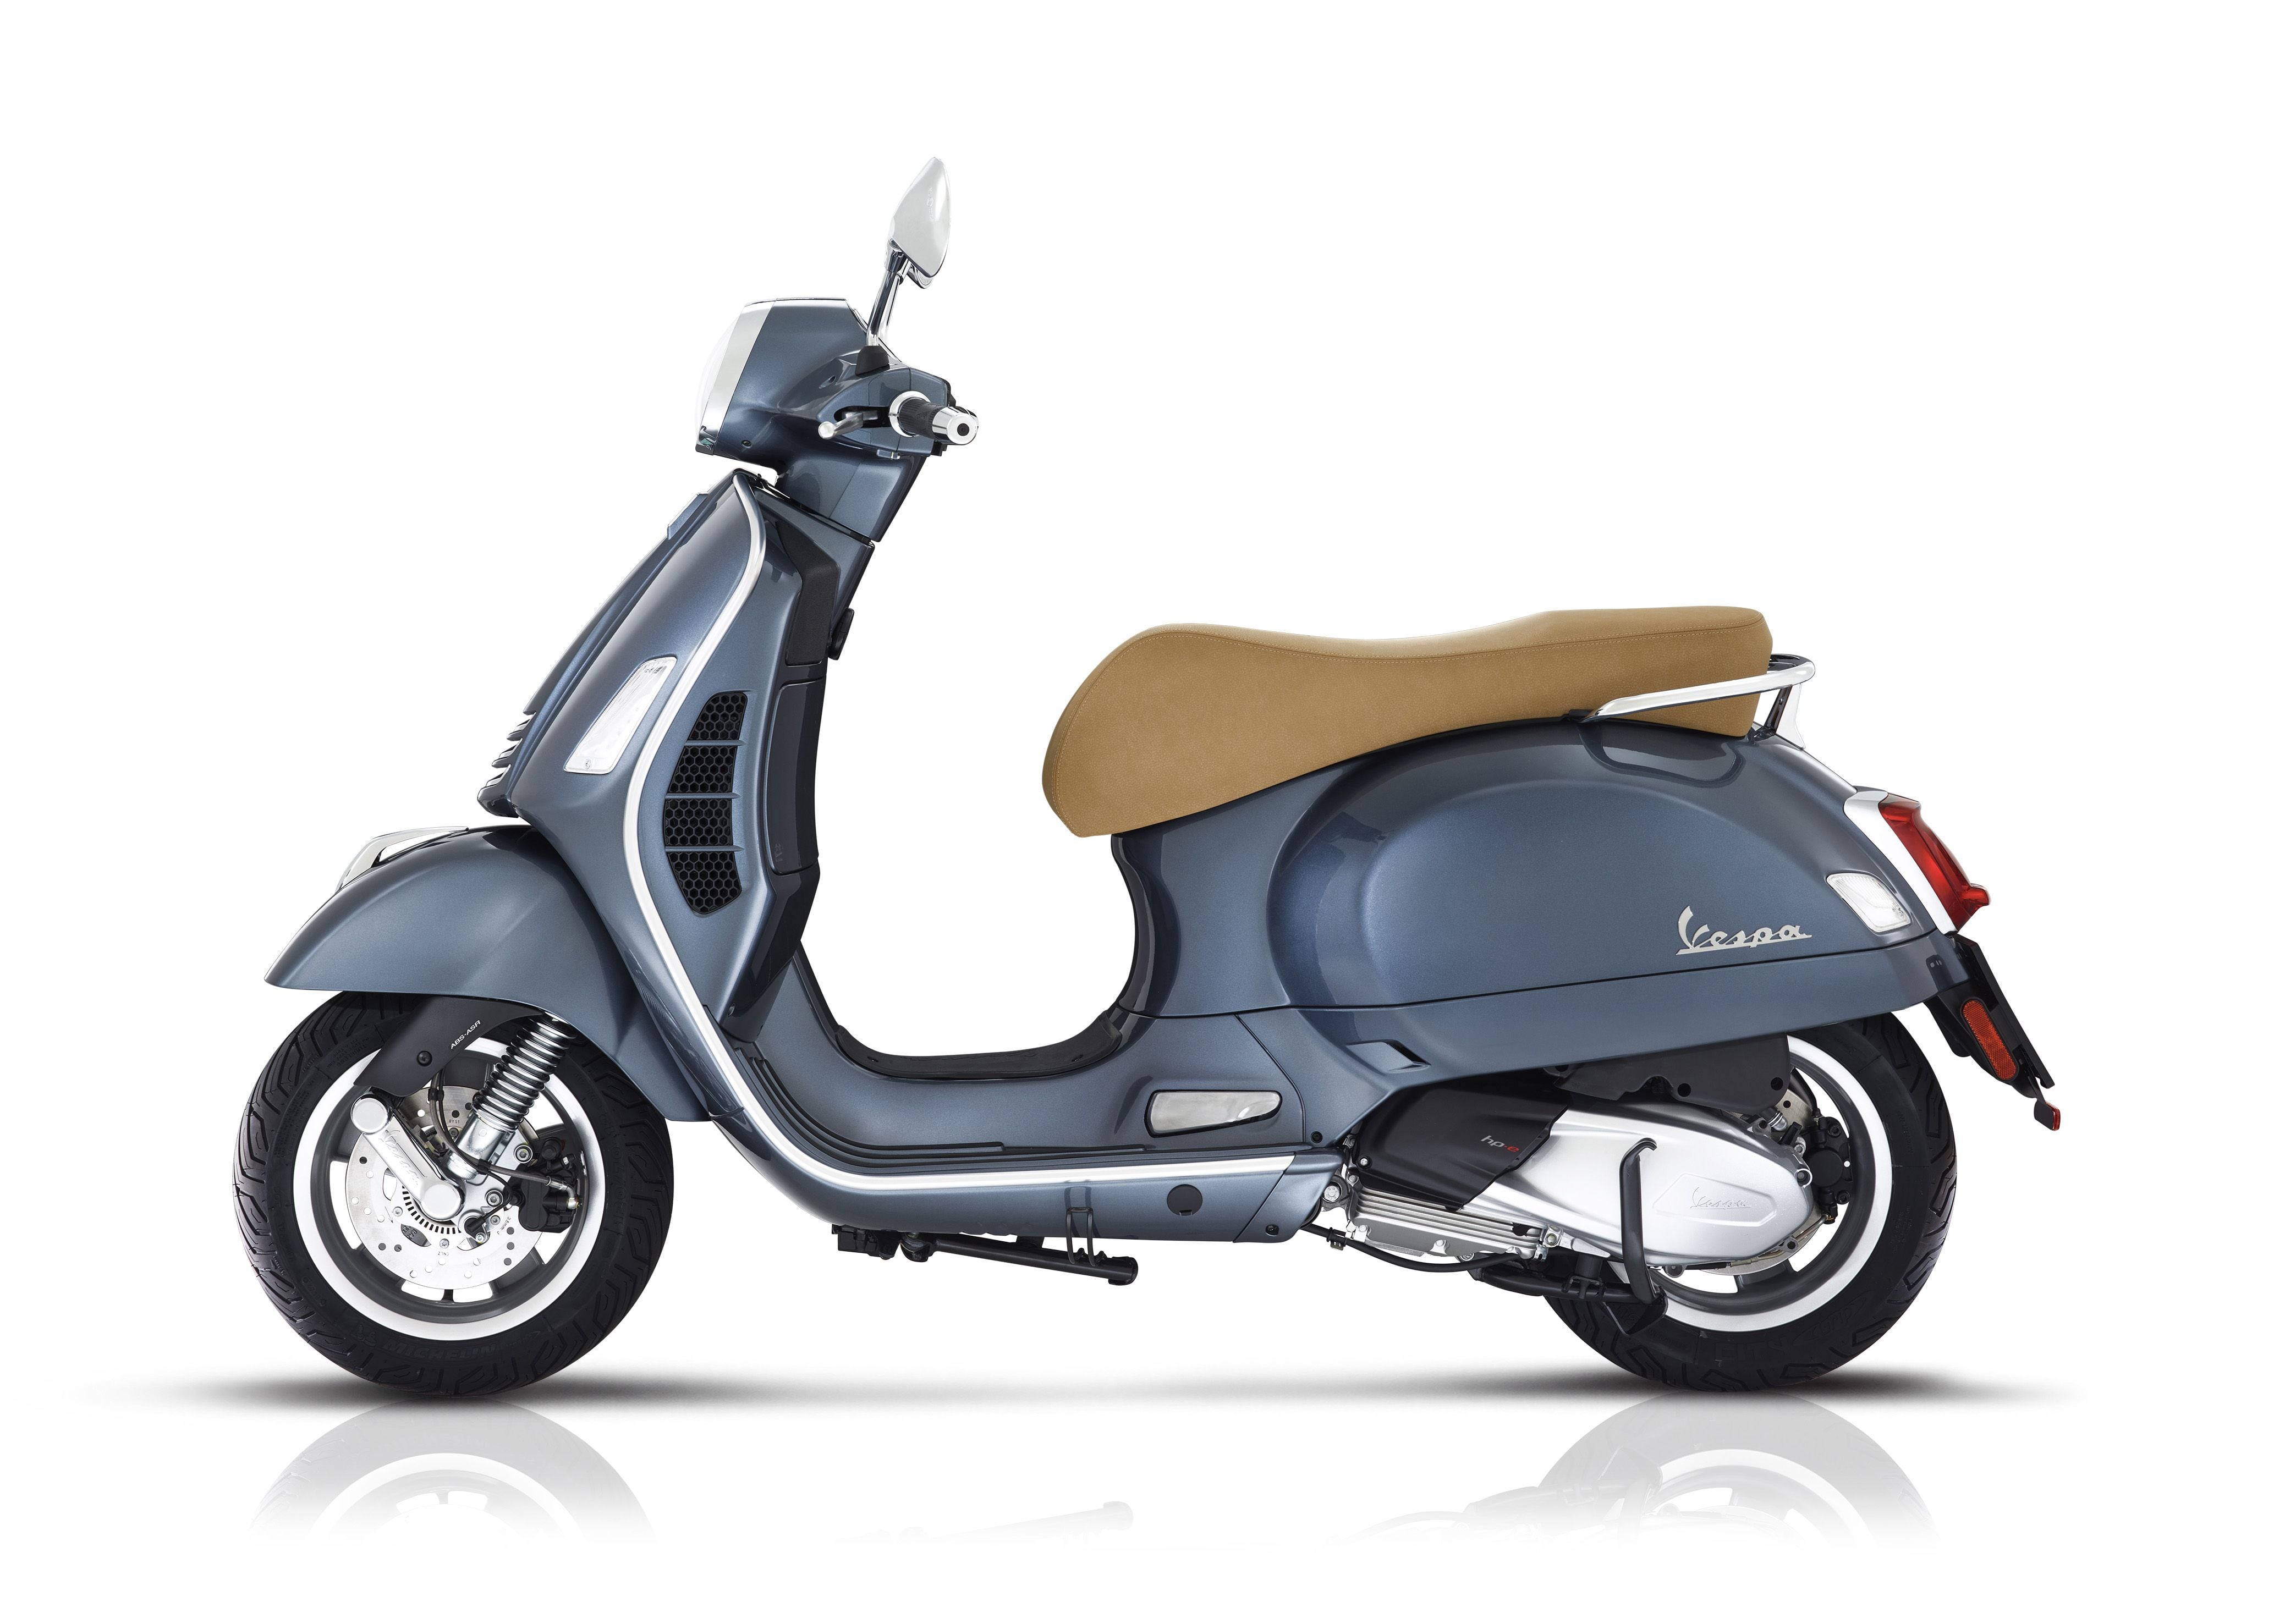 Virkelig Geografi besøg 2020 Vespa GTS 300 Buyer's Guide: Specs, Photos, Price | Cycle World